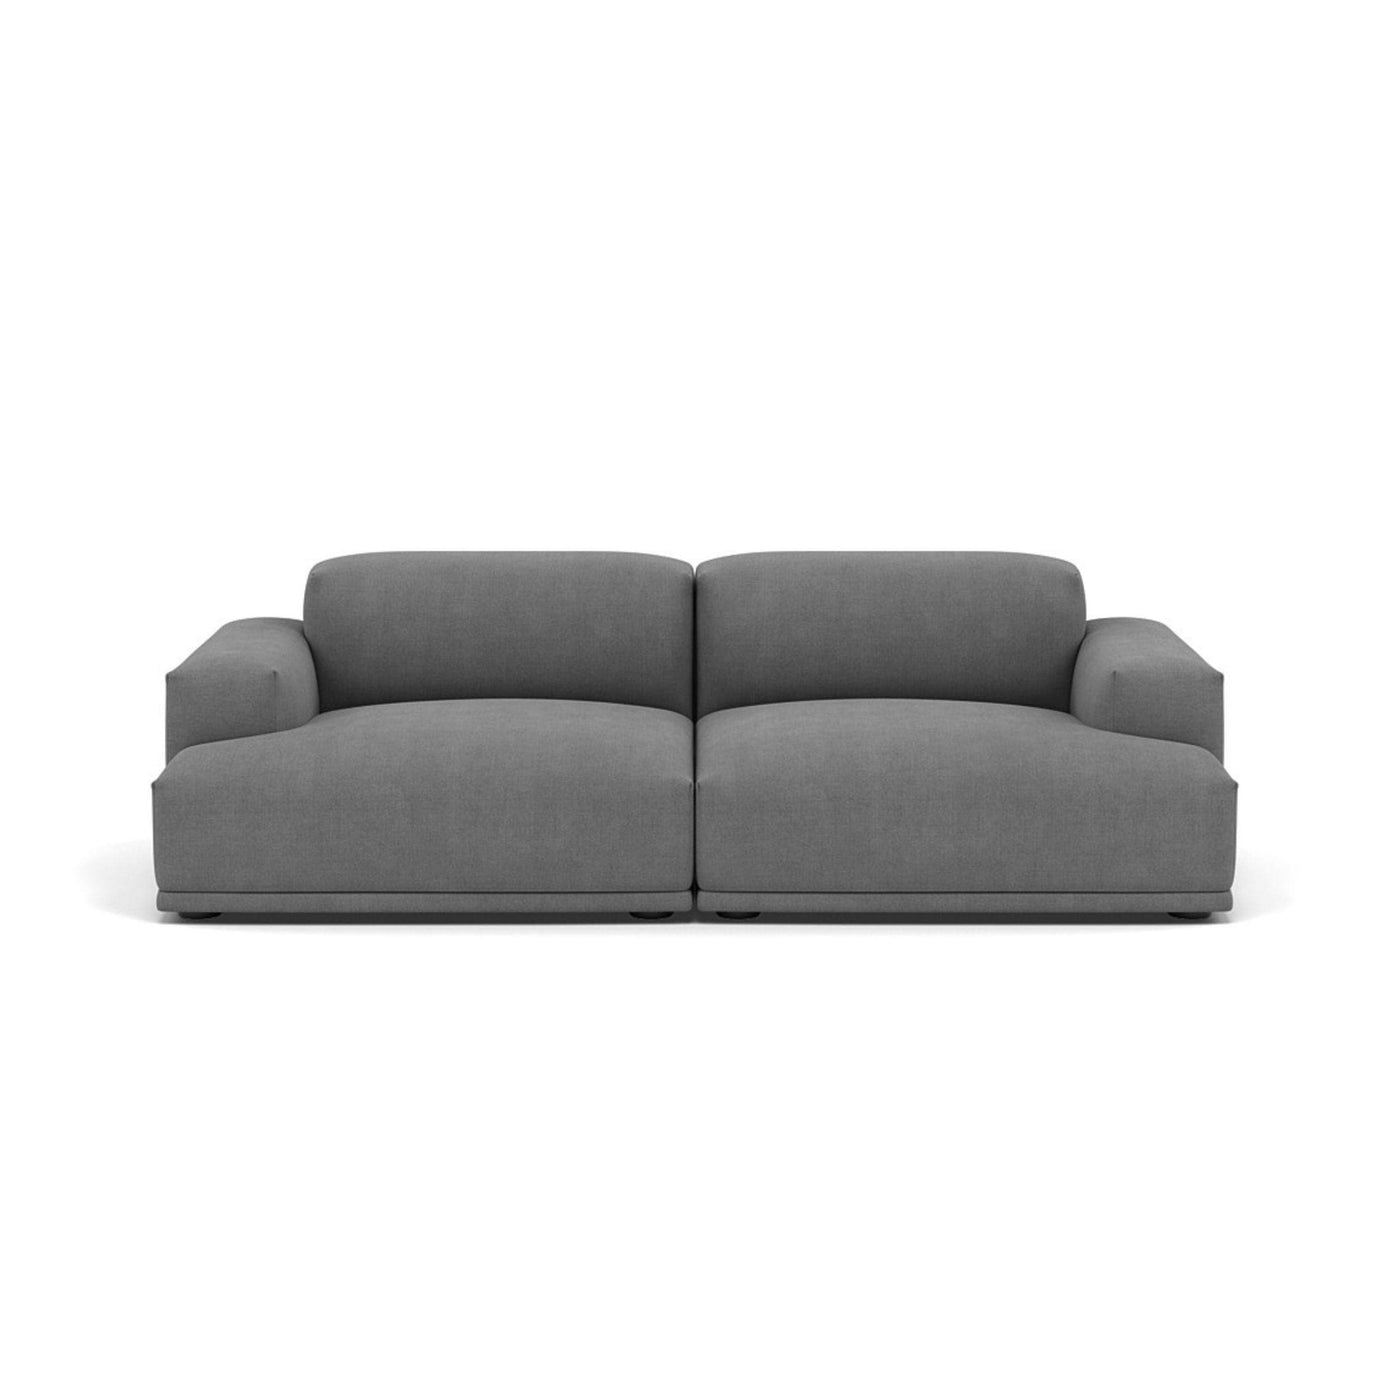 Muuto Connect Sofa 2 seater. Available made to order from someday designs. #colour_fiord-171